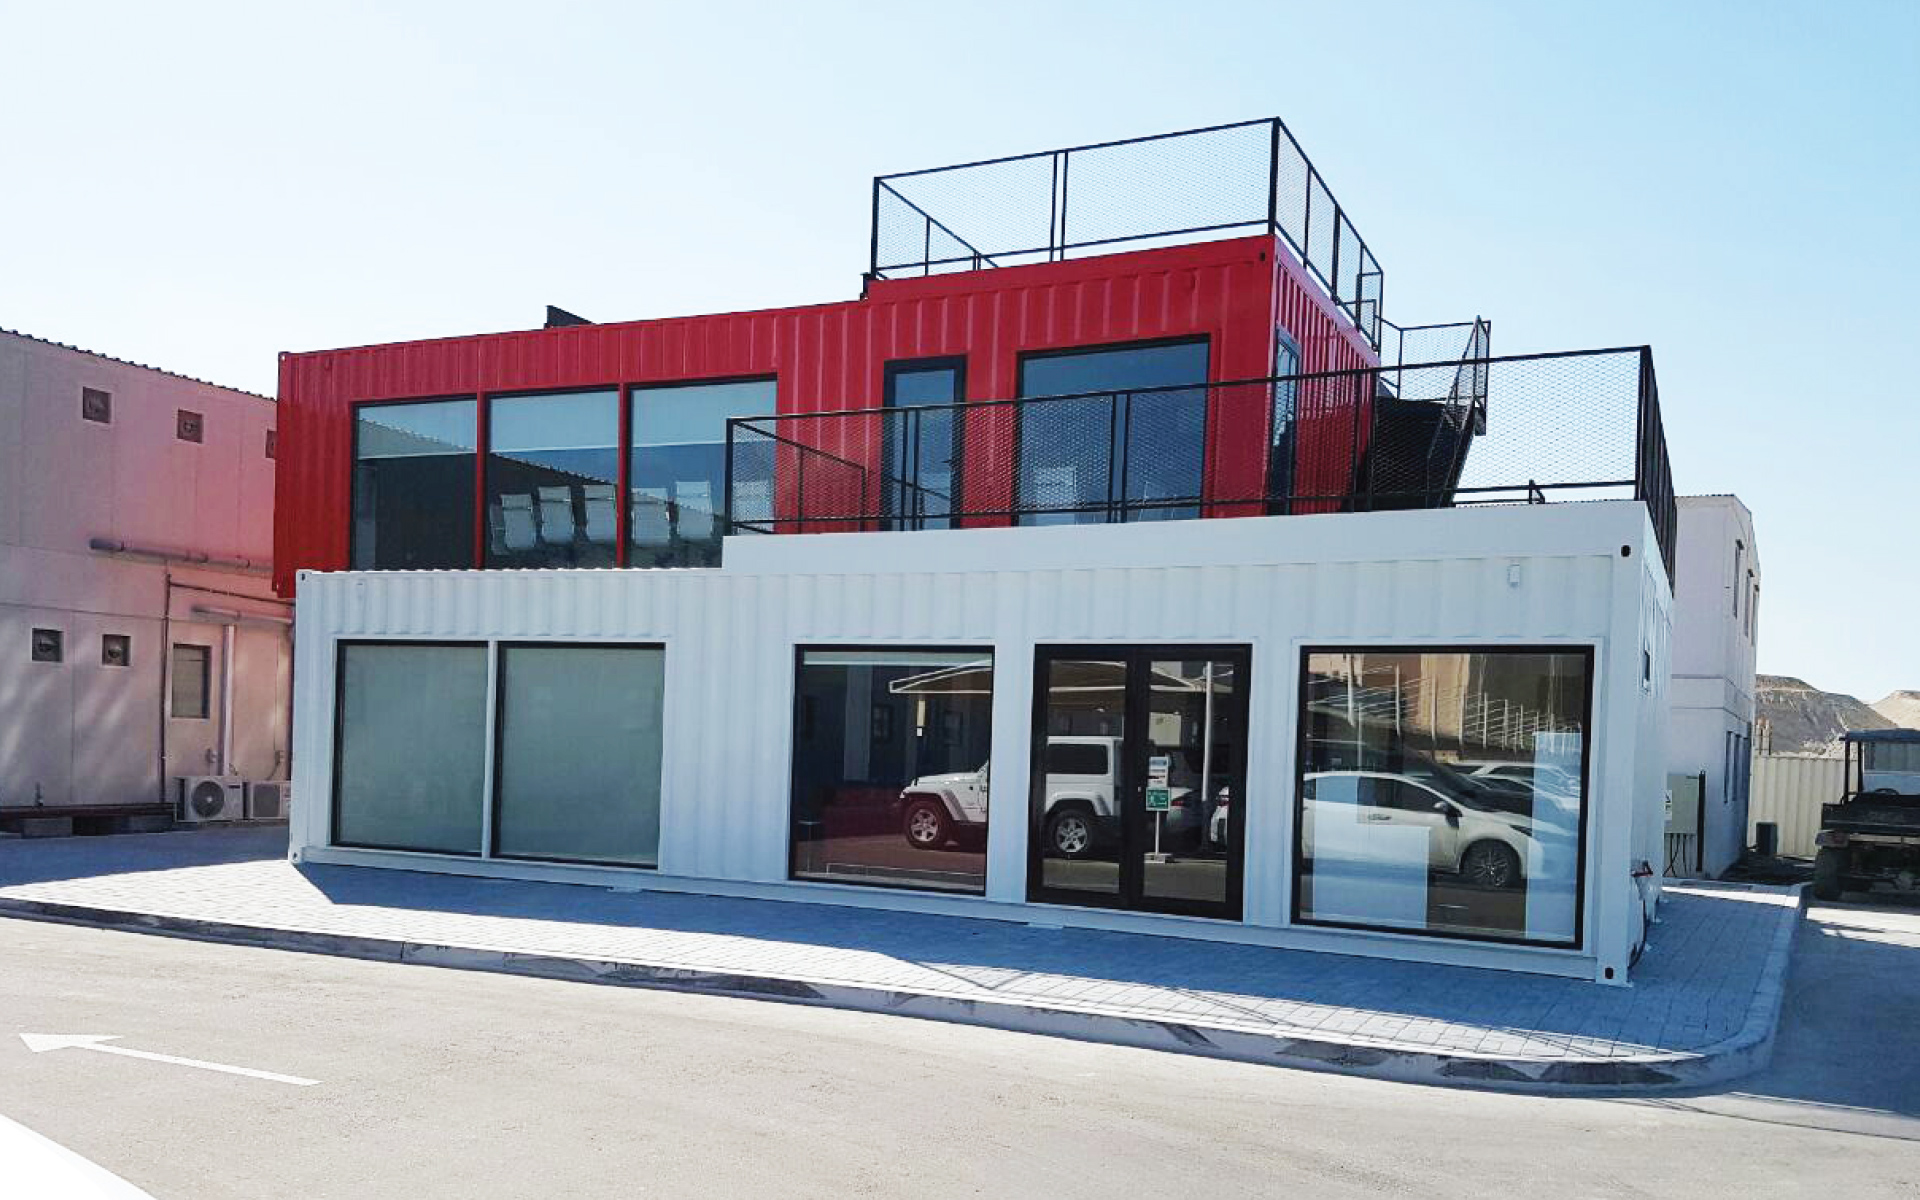 SALES OFFICE (Container Building) by Qubes